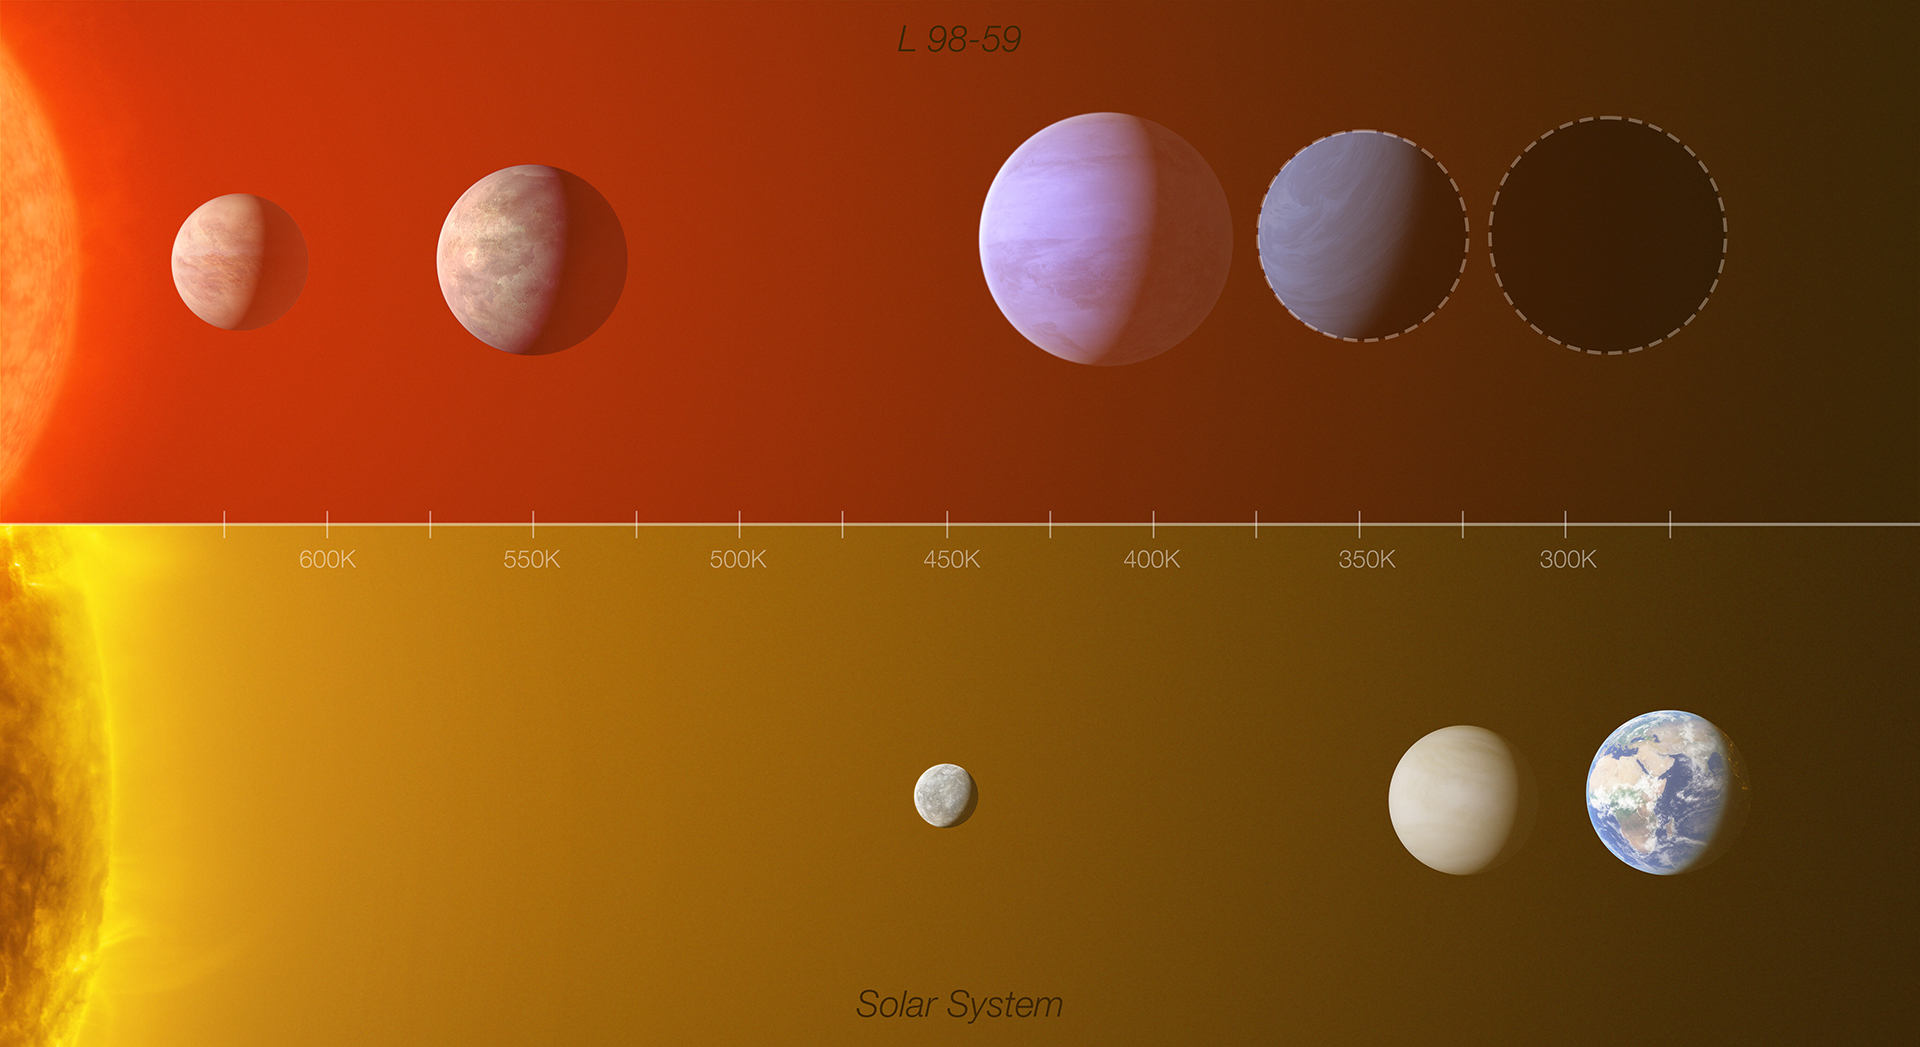 Comparison of the L 98-59 exoplanet system with the inner Solar System. Credit: ESO/L. Calçada/M. Kornmesser (Acknowledgment: O. Demangeon)